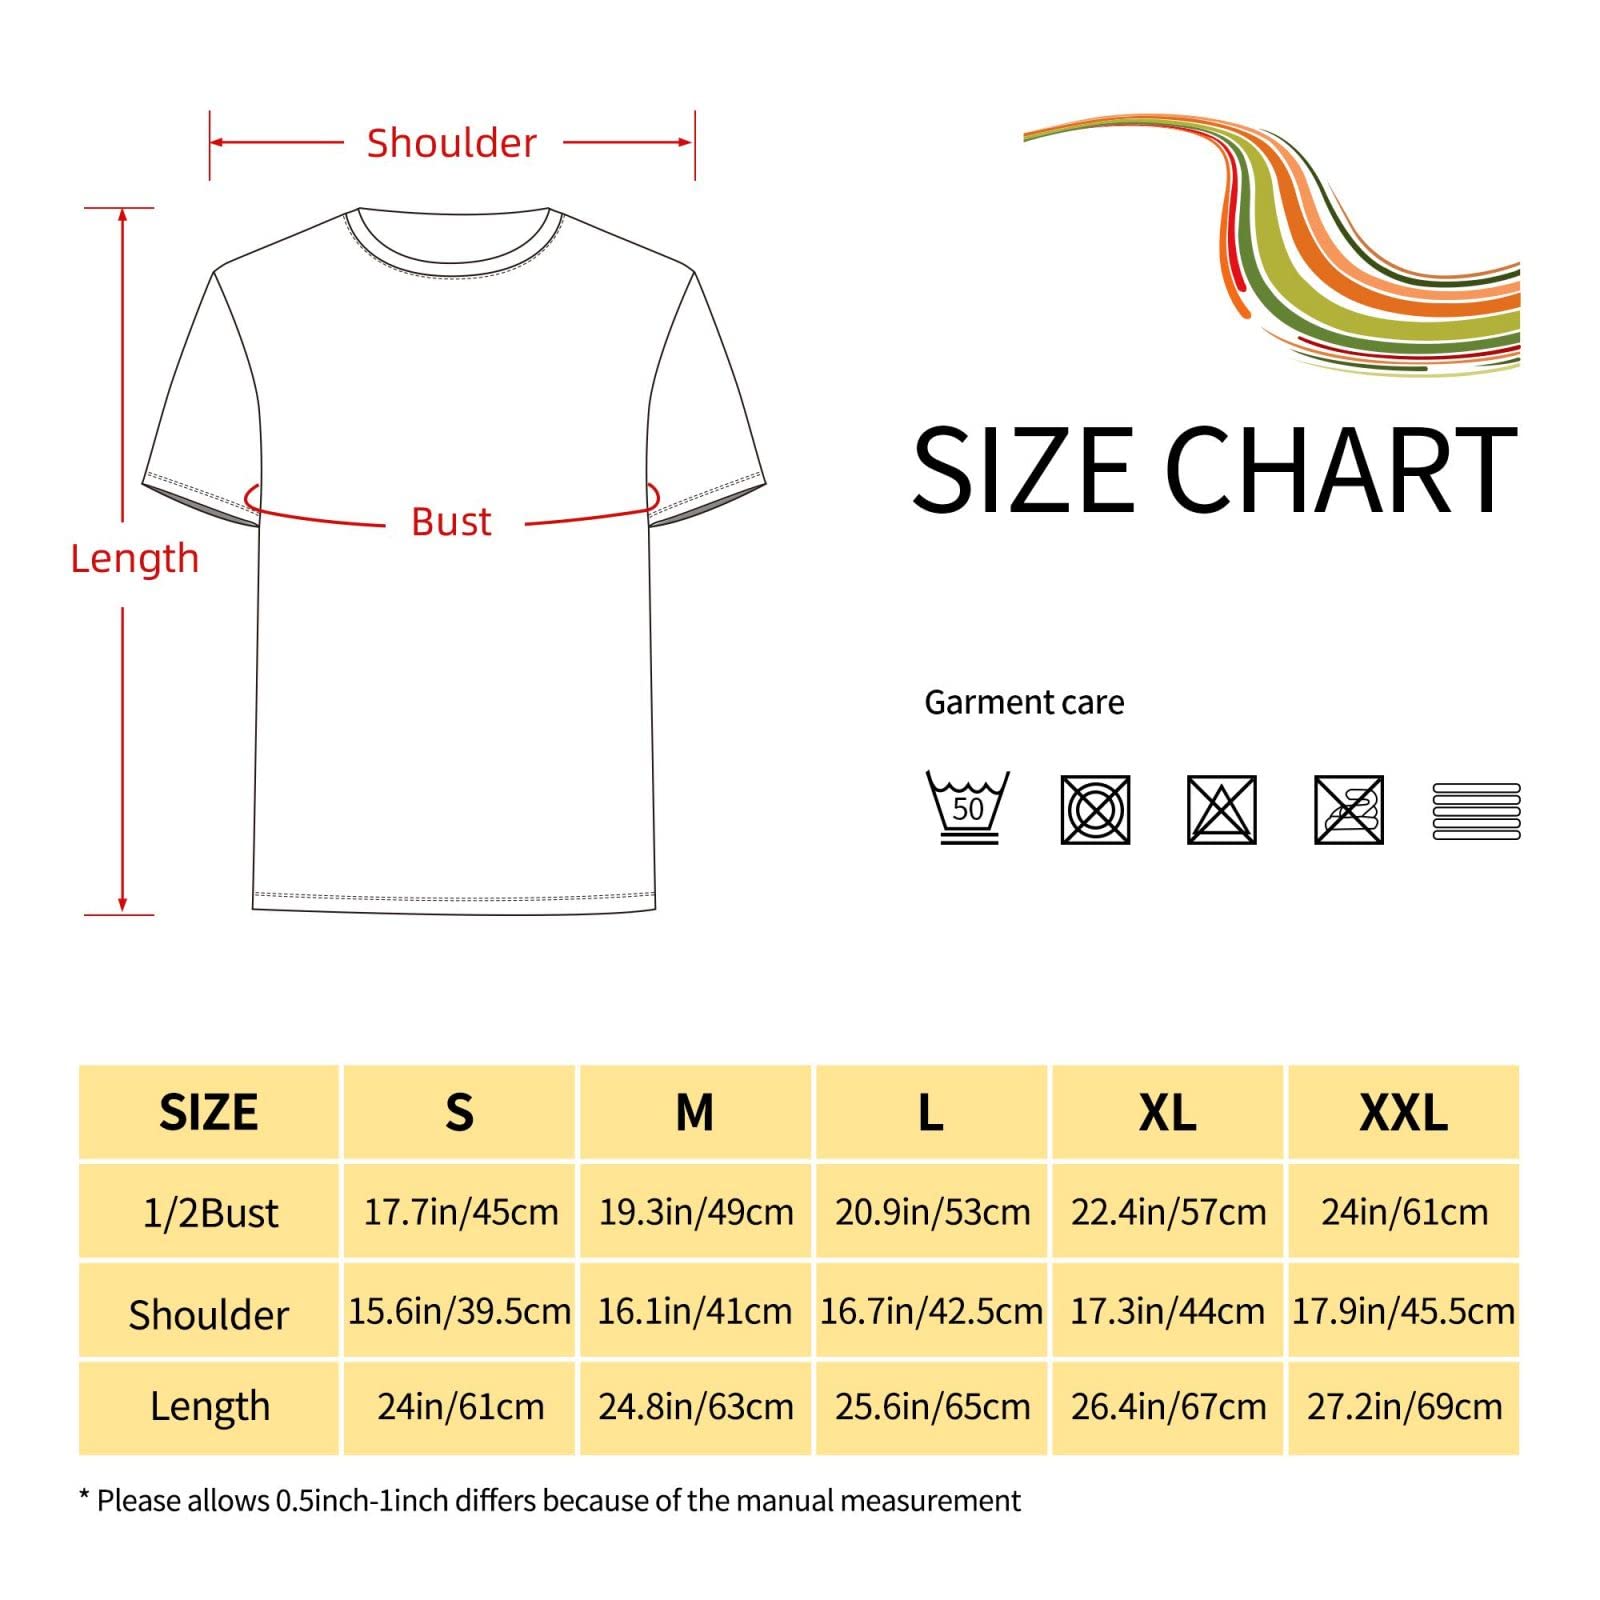 Teen Womens T-Shirt Tops Breathable Short Sleeve Round Neck Tees Clothing